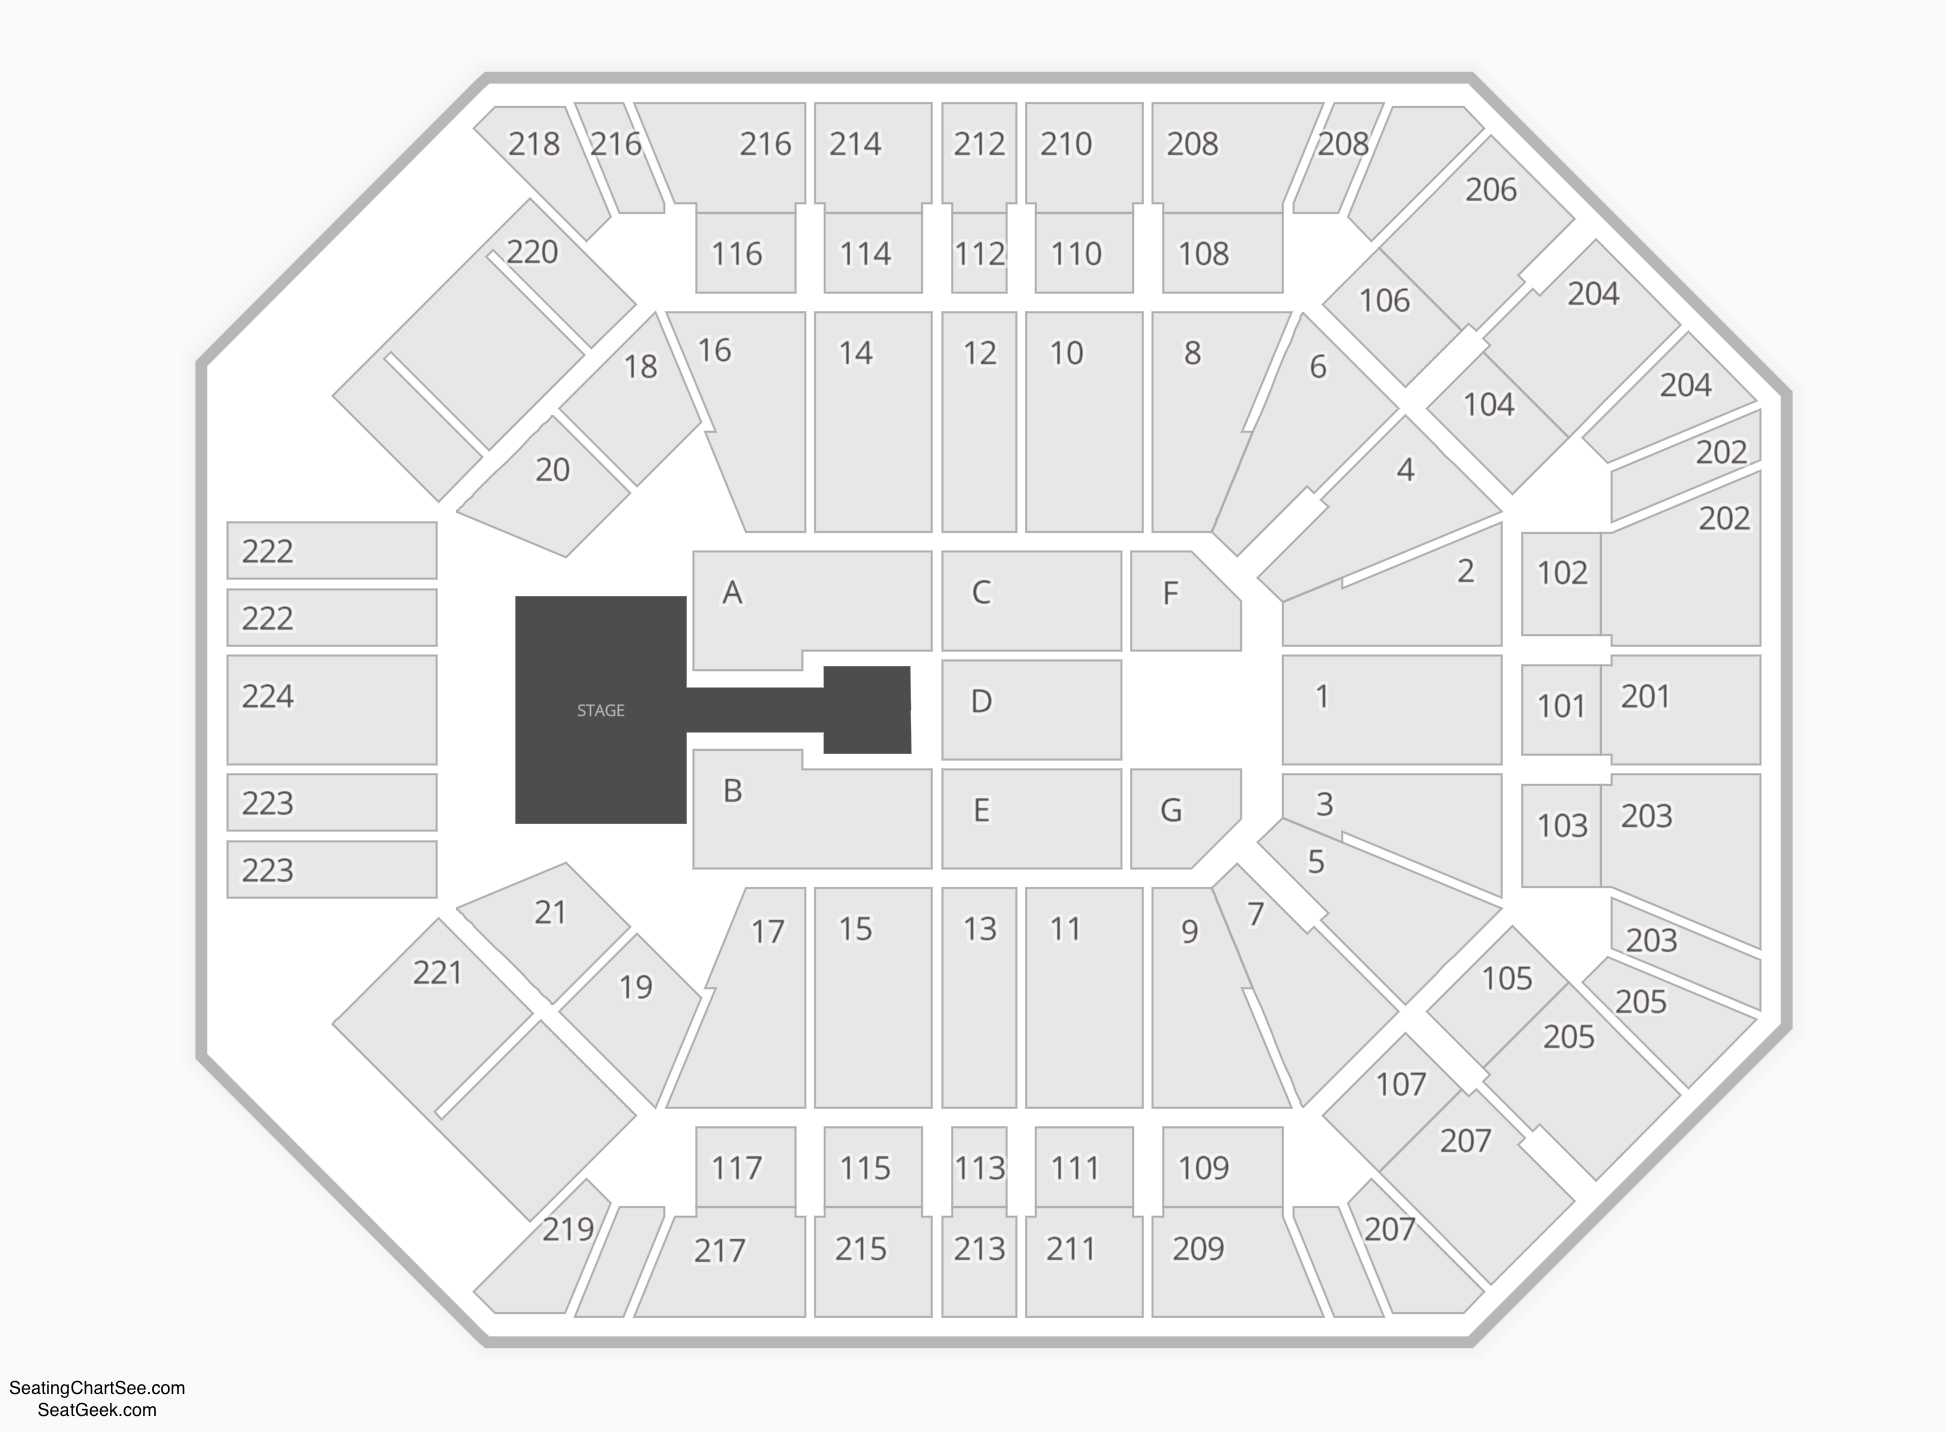 Arena posture horizon mgm grand garden arena seating map Insight Since Plow